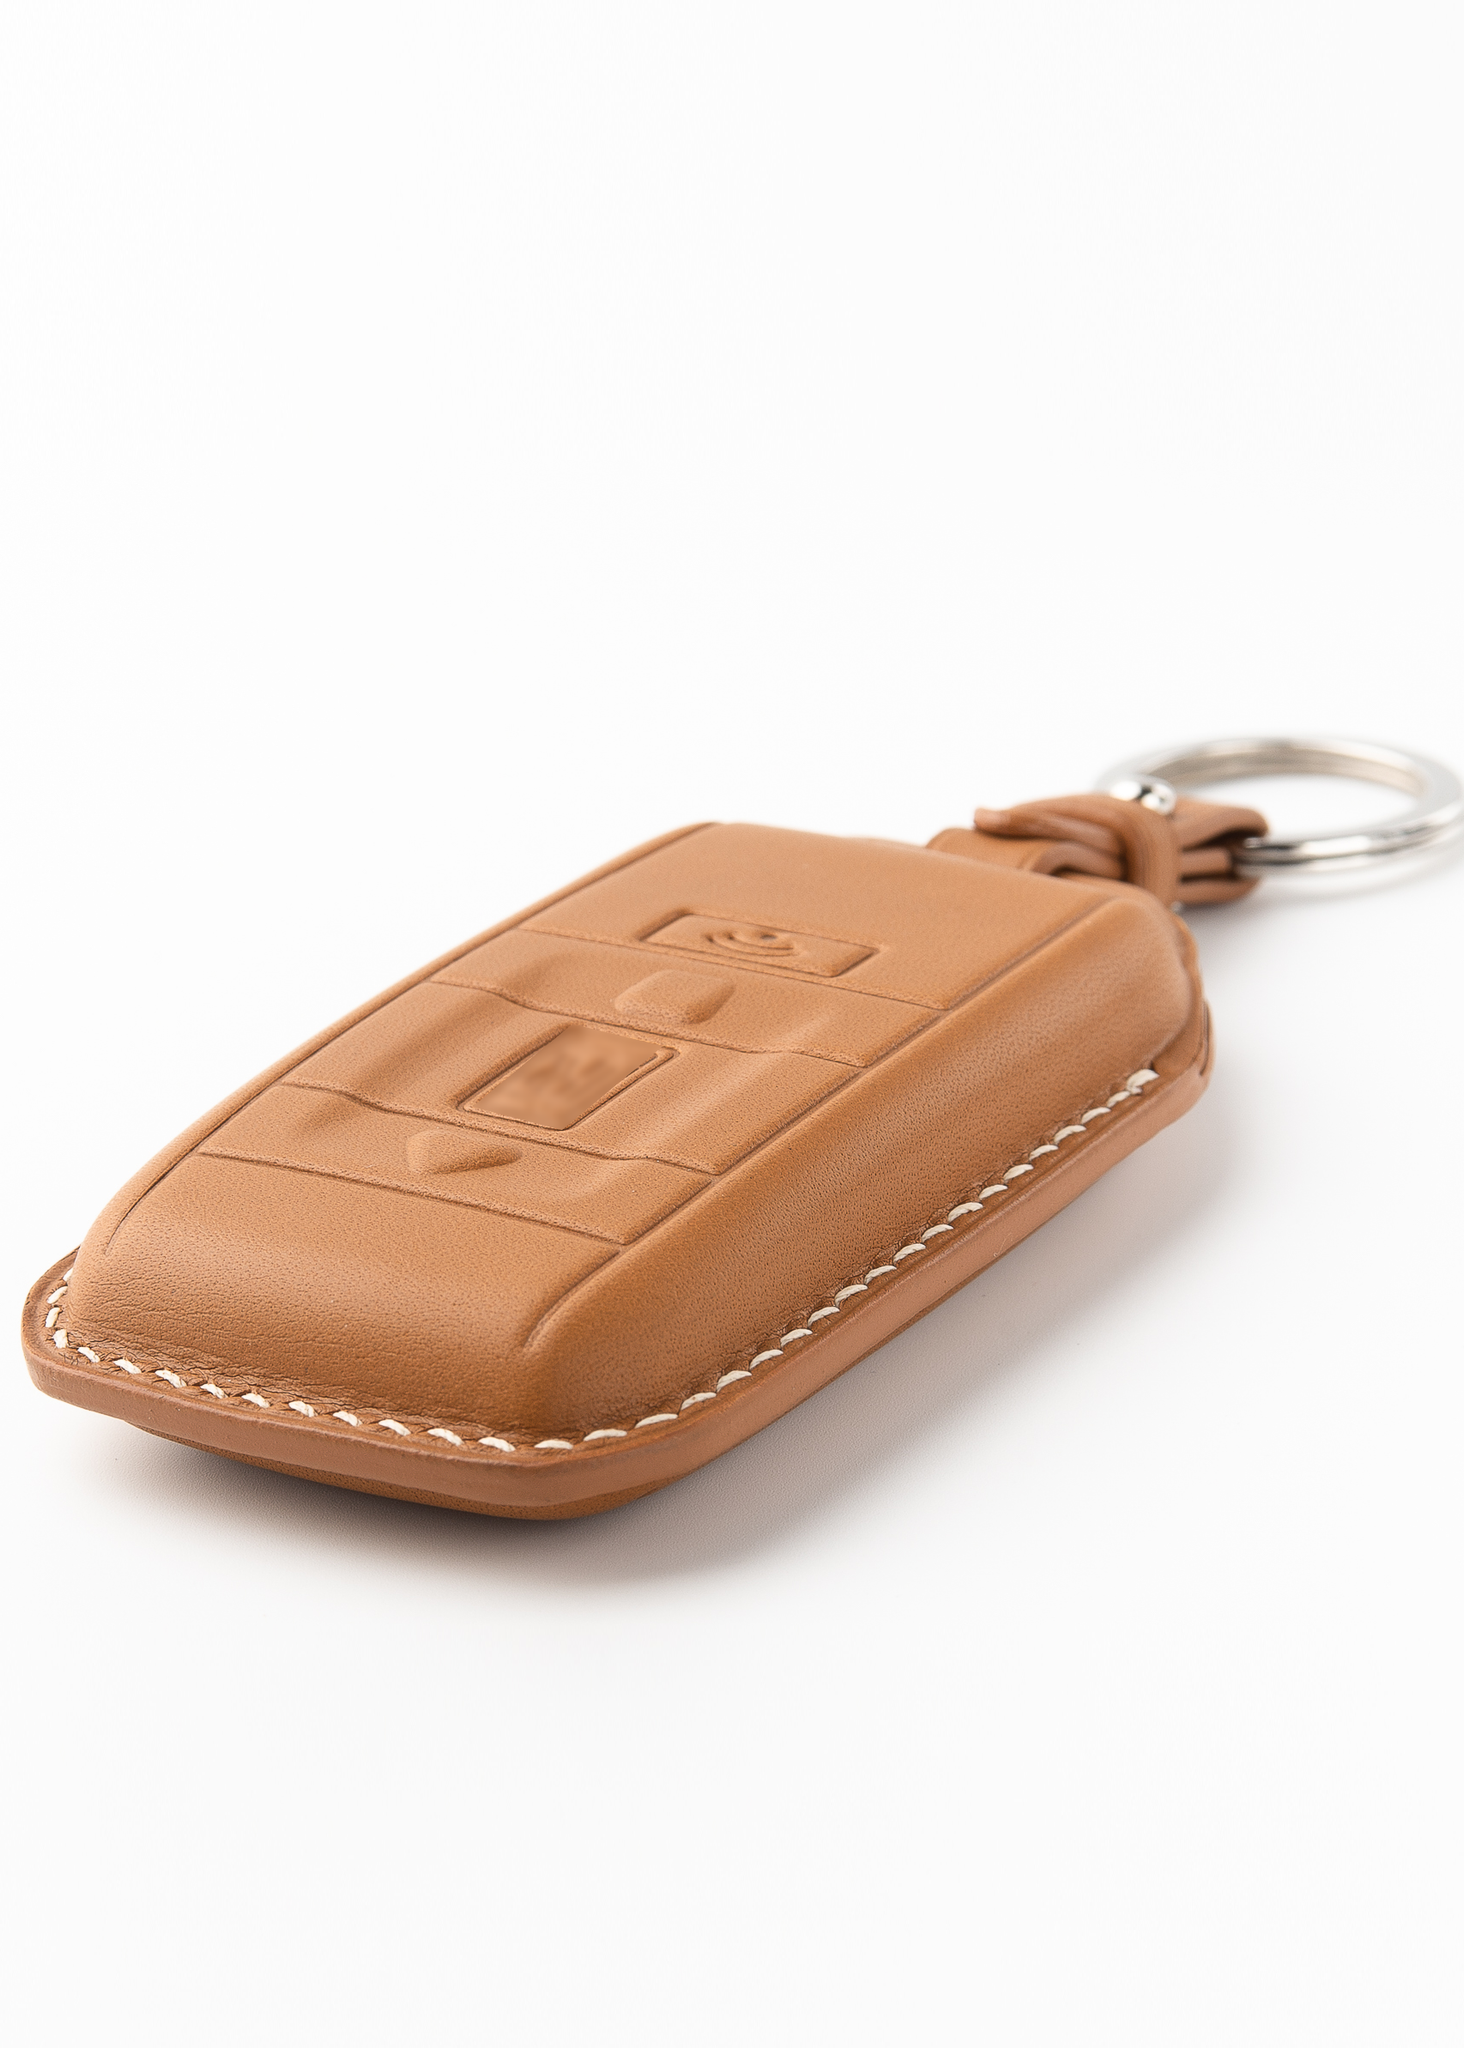 Timotheus for Rolls-Royce key fob cover case, Compatible with Rolls-Royce key case, Handmade Genuine Leather for Rolls-Royce keychains | RR22